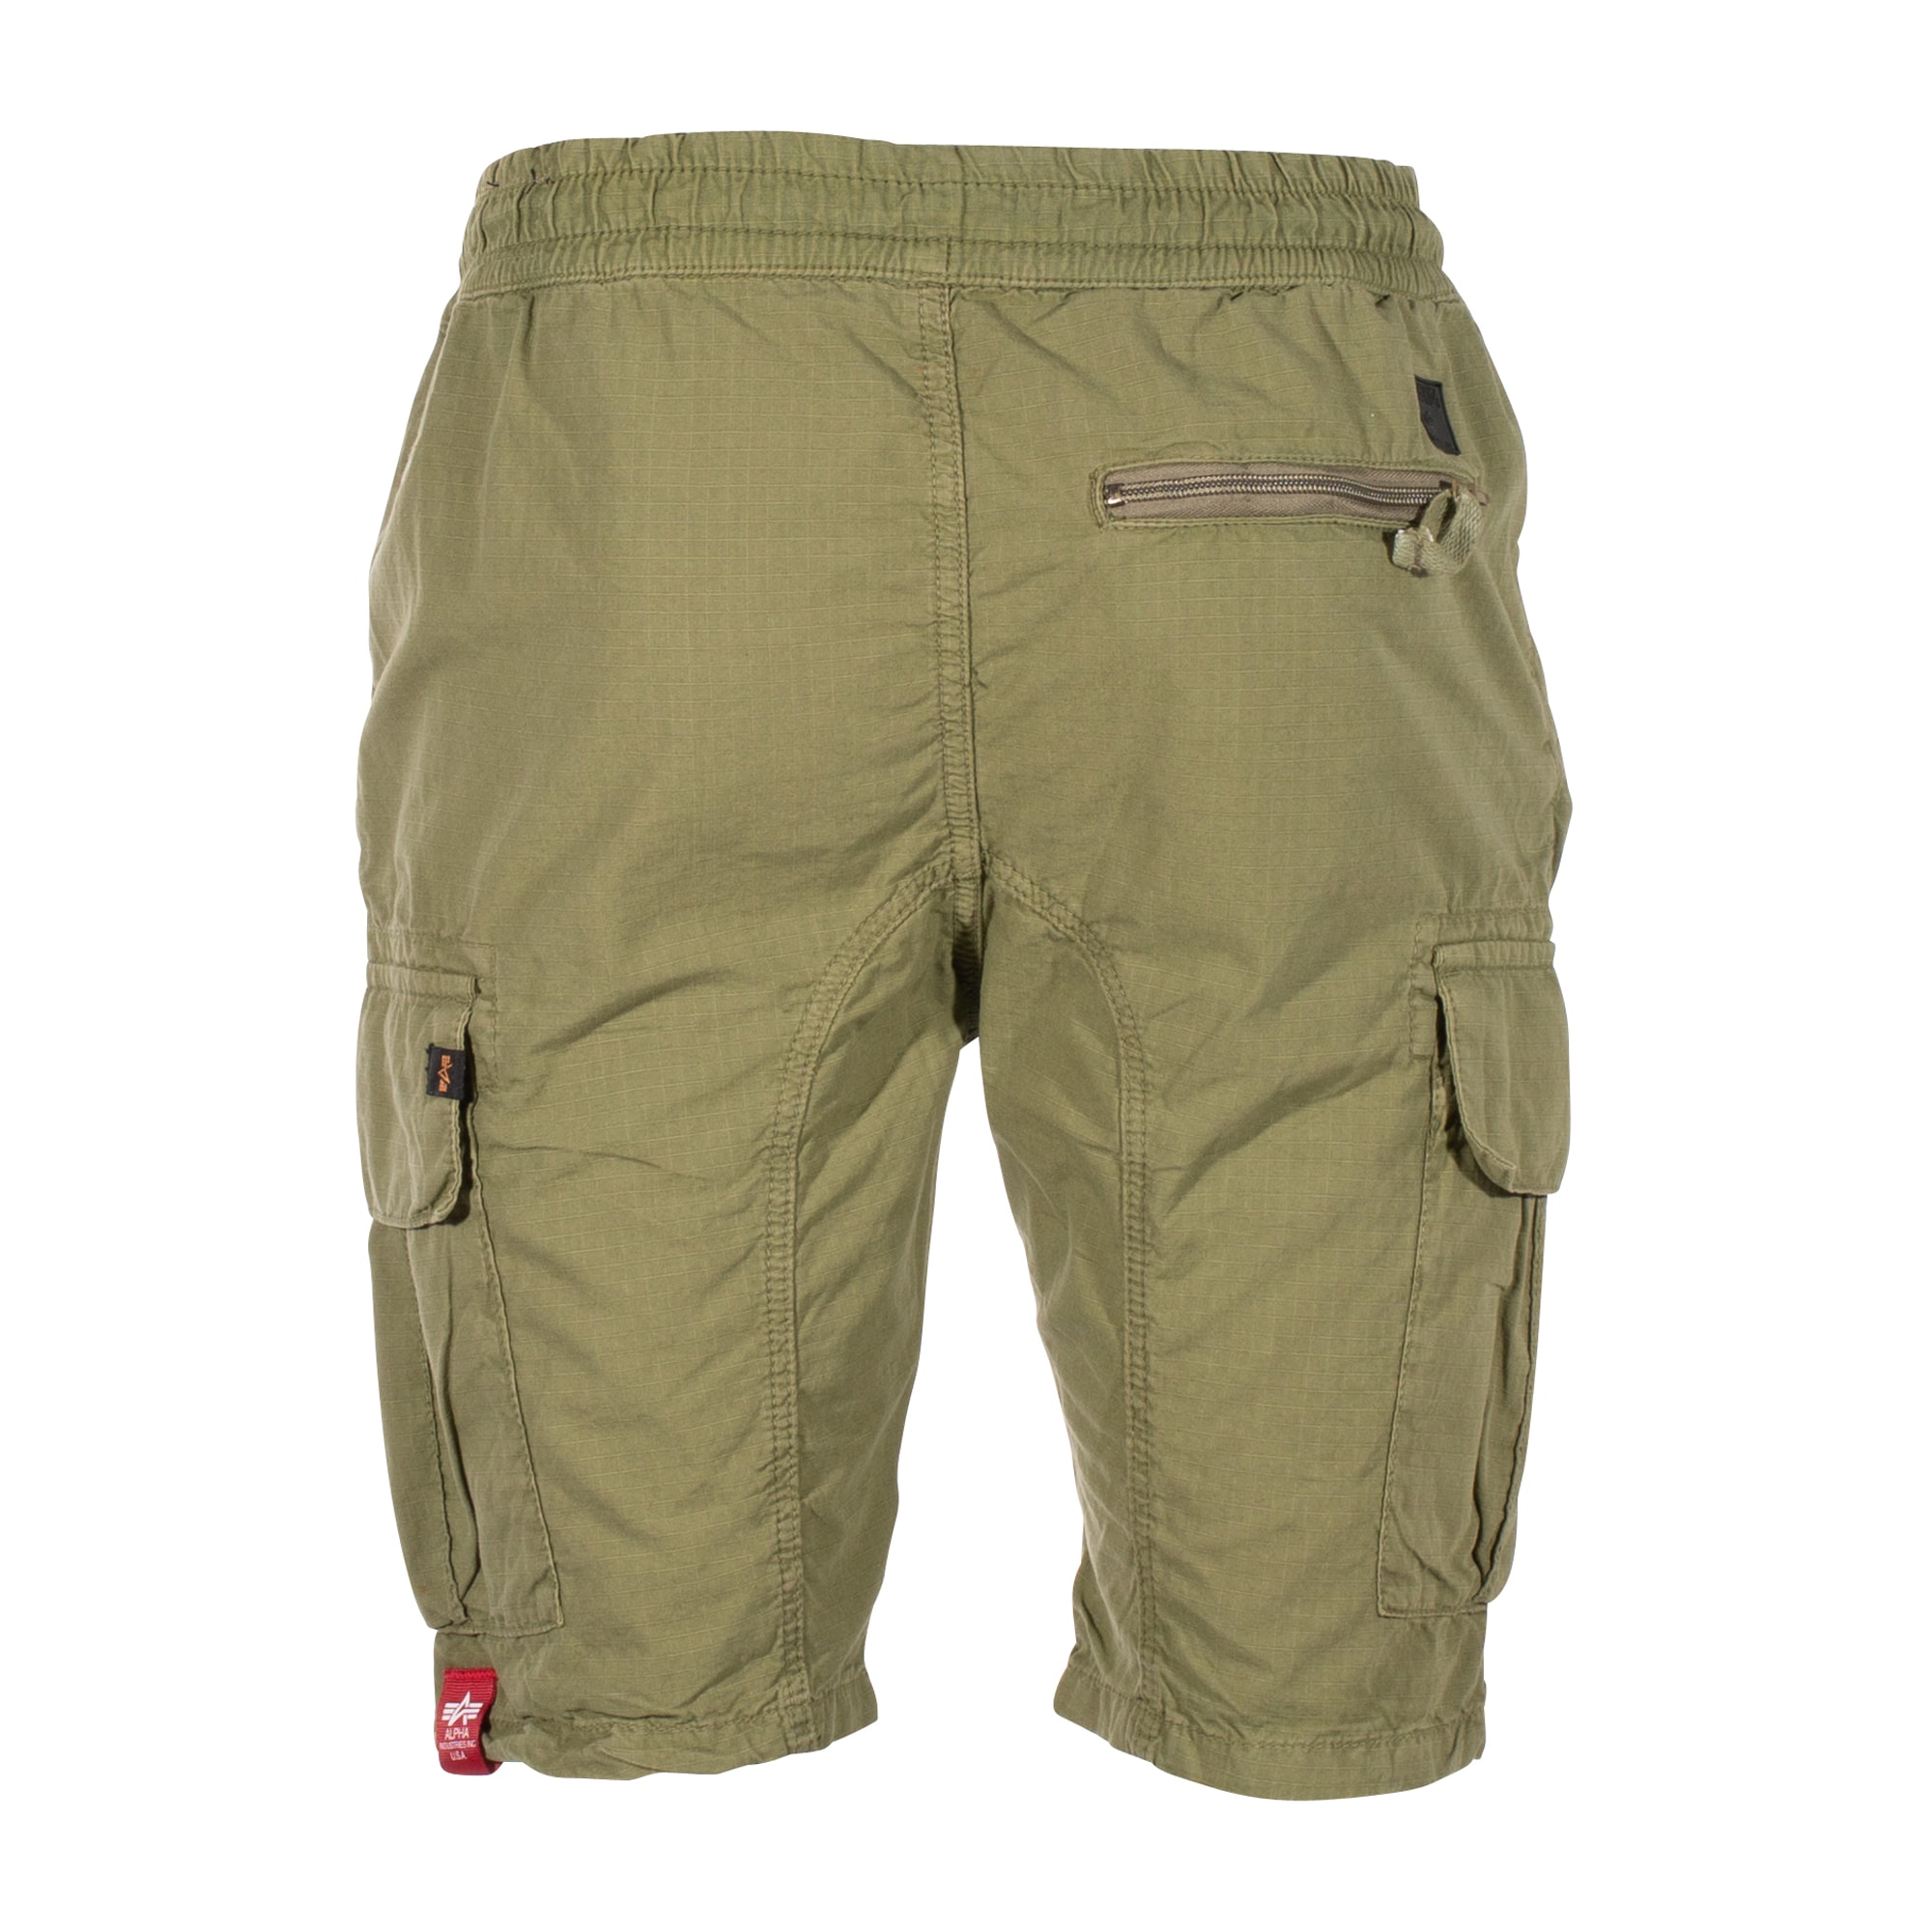 Short Purchase olive ASMC Ripstop Alpha the Industries by Jogger